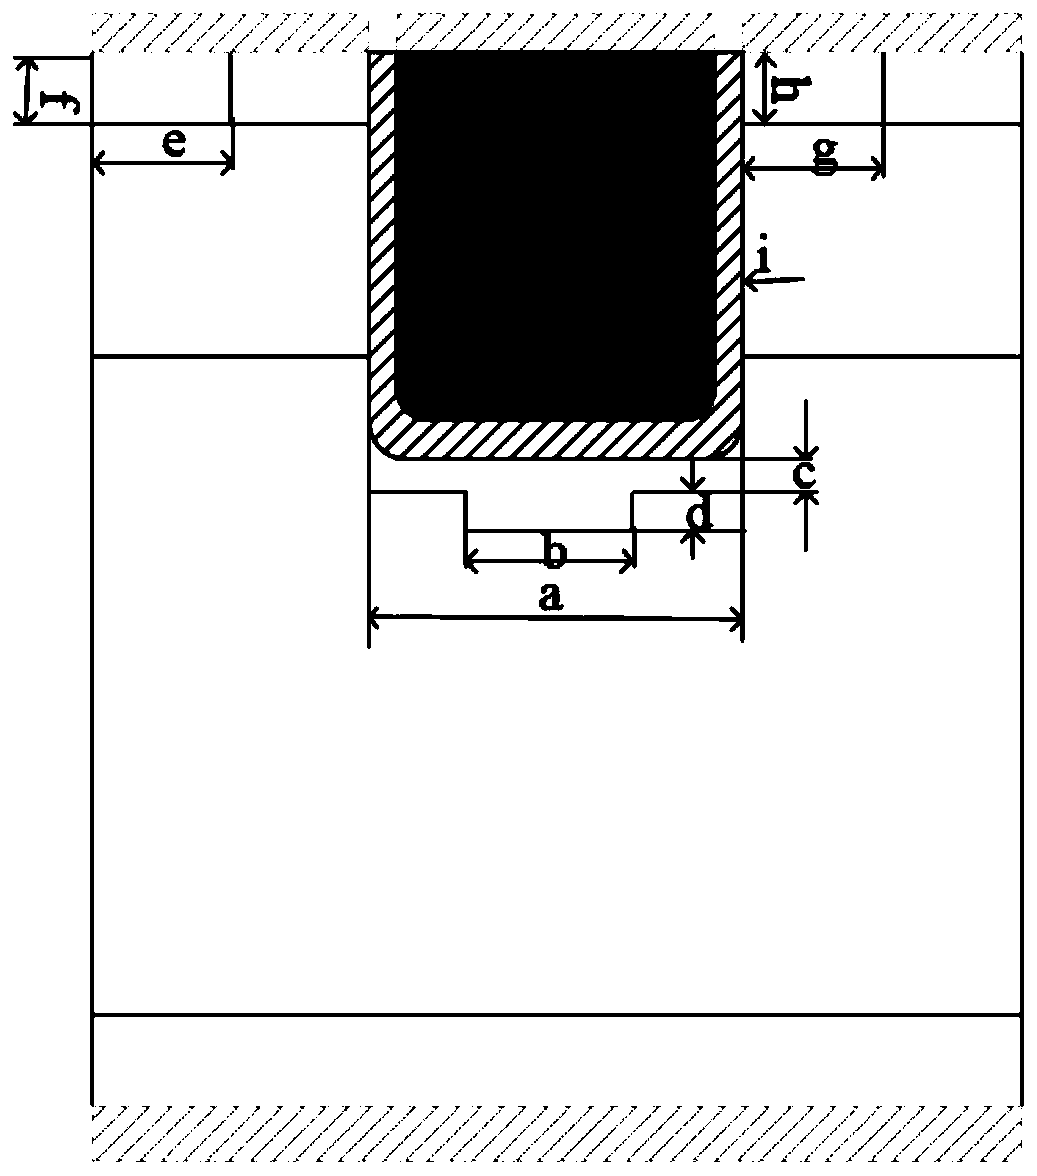 Silicon carbide MOSFET device with T-type masking layer structure